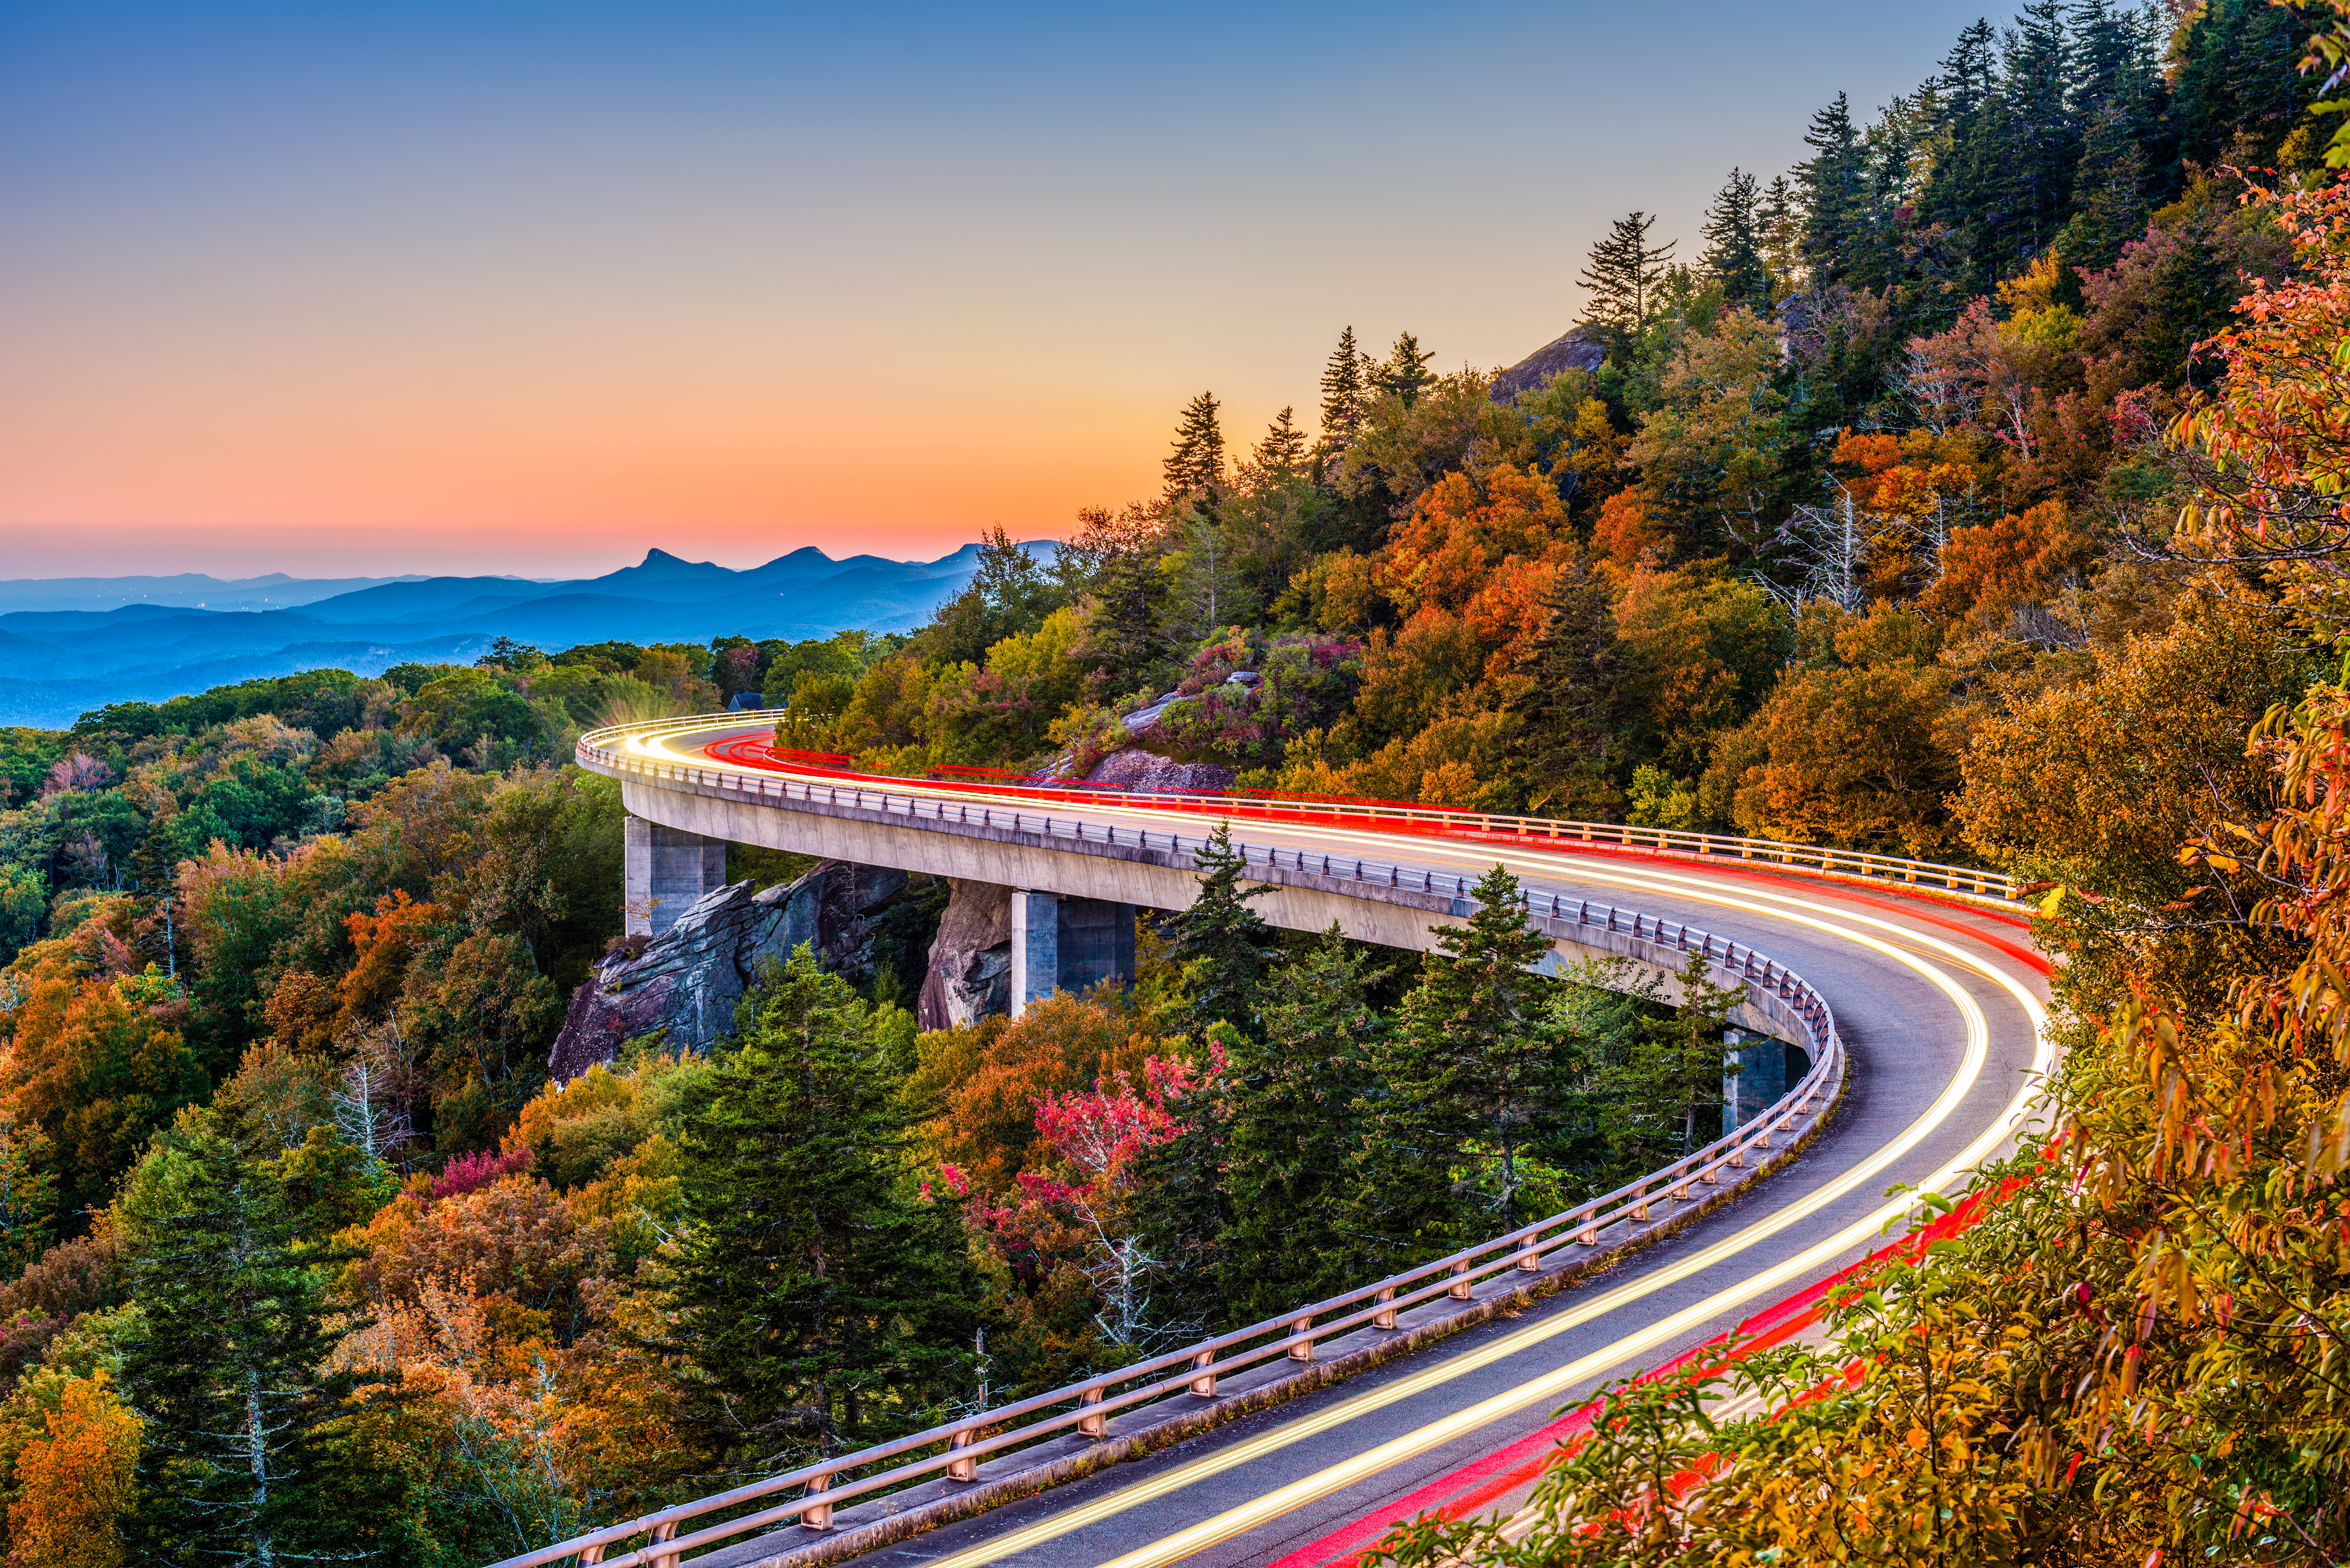 Best Things to Do in Asheville - Linn Cove Viaduct on the Blue Ridge Parkway